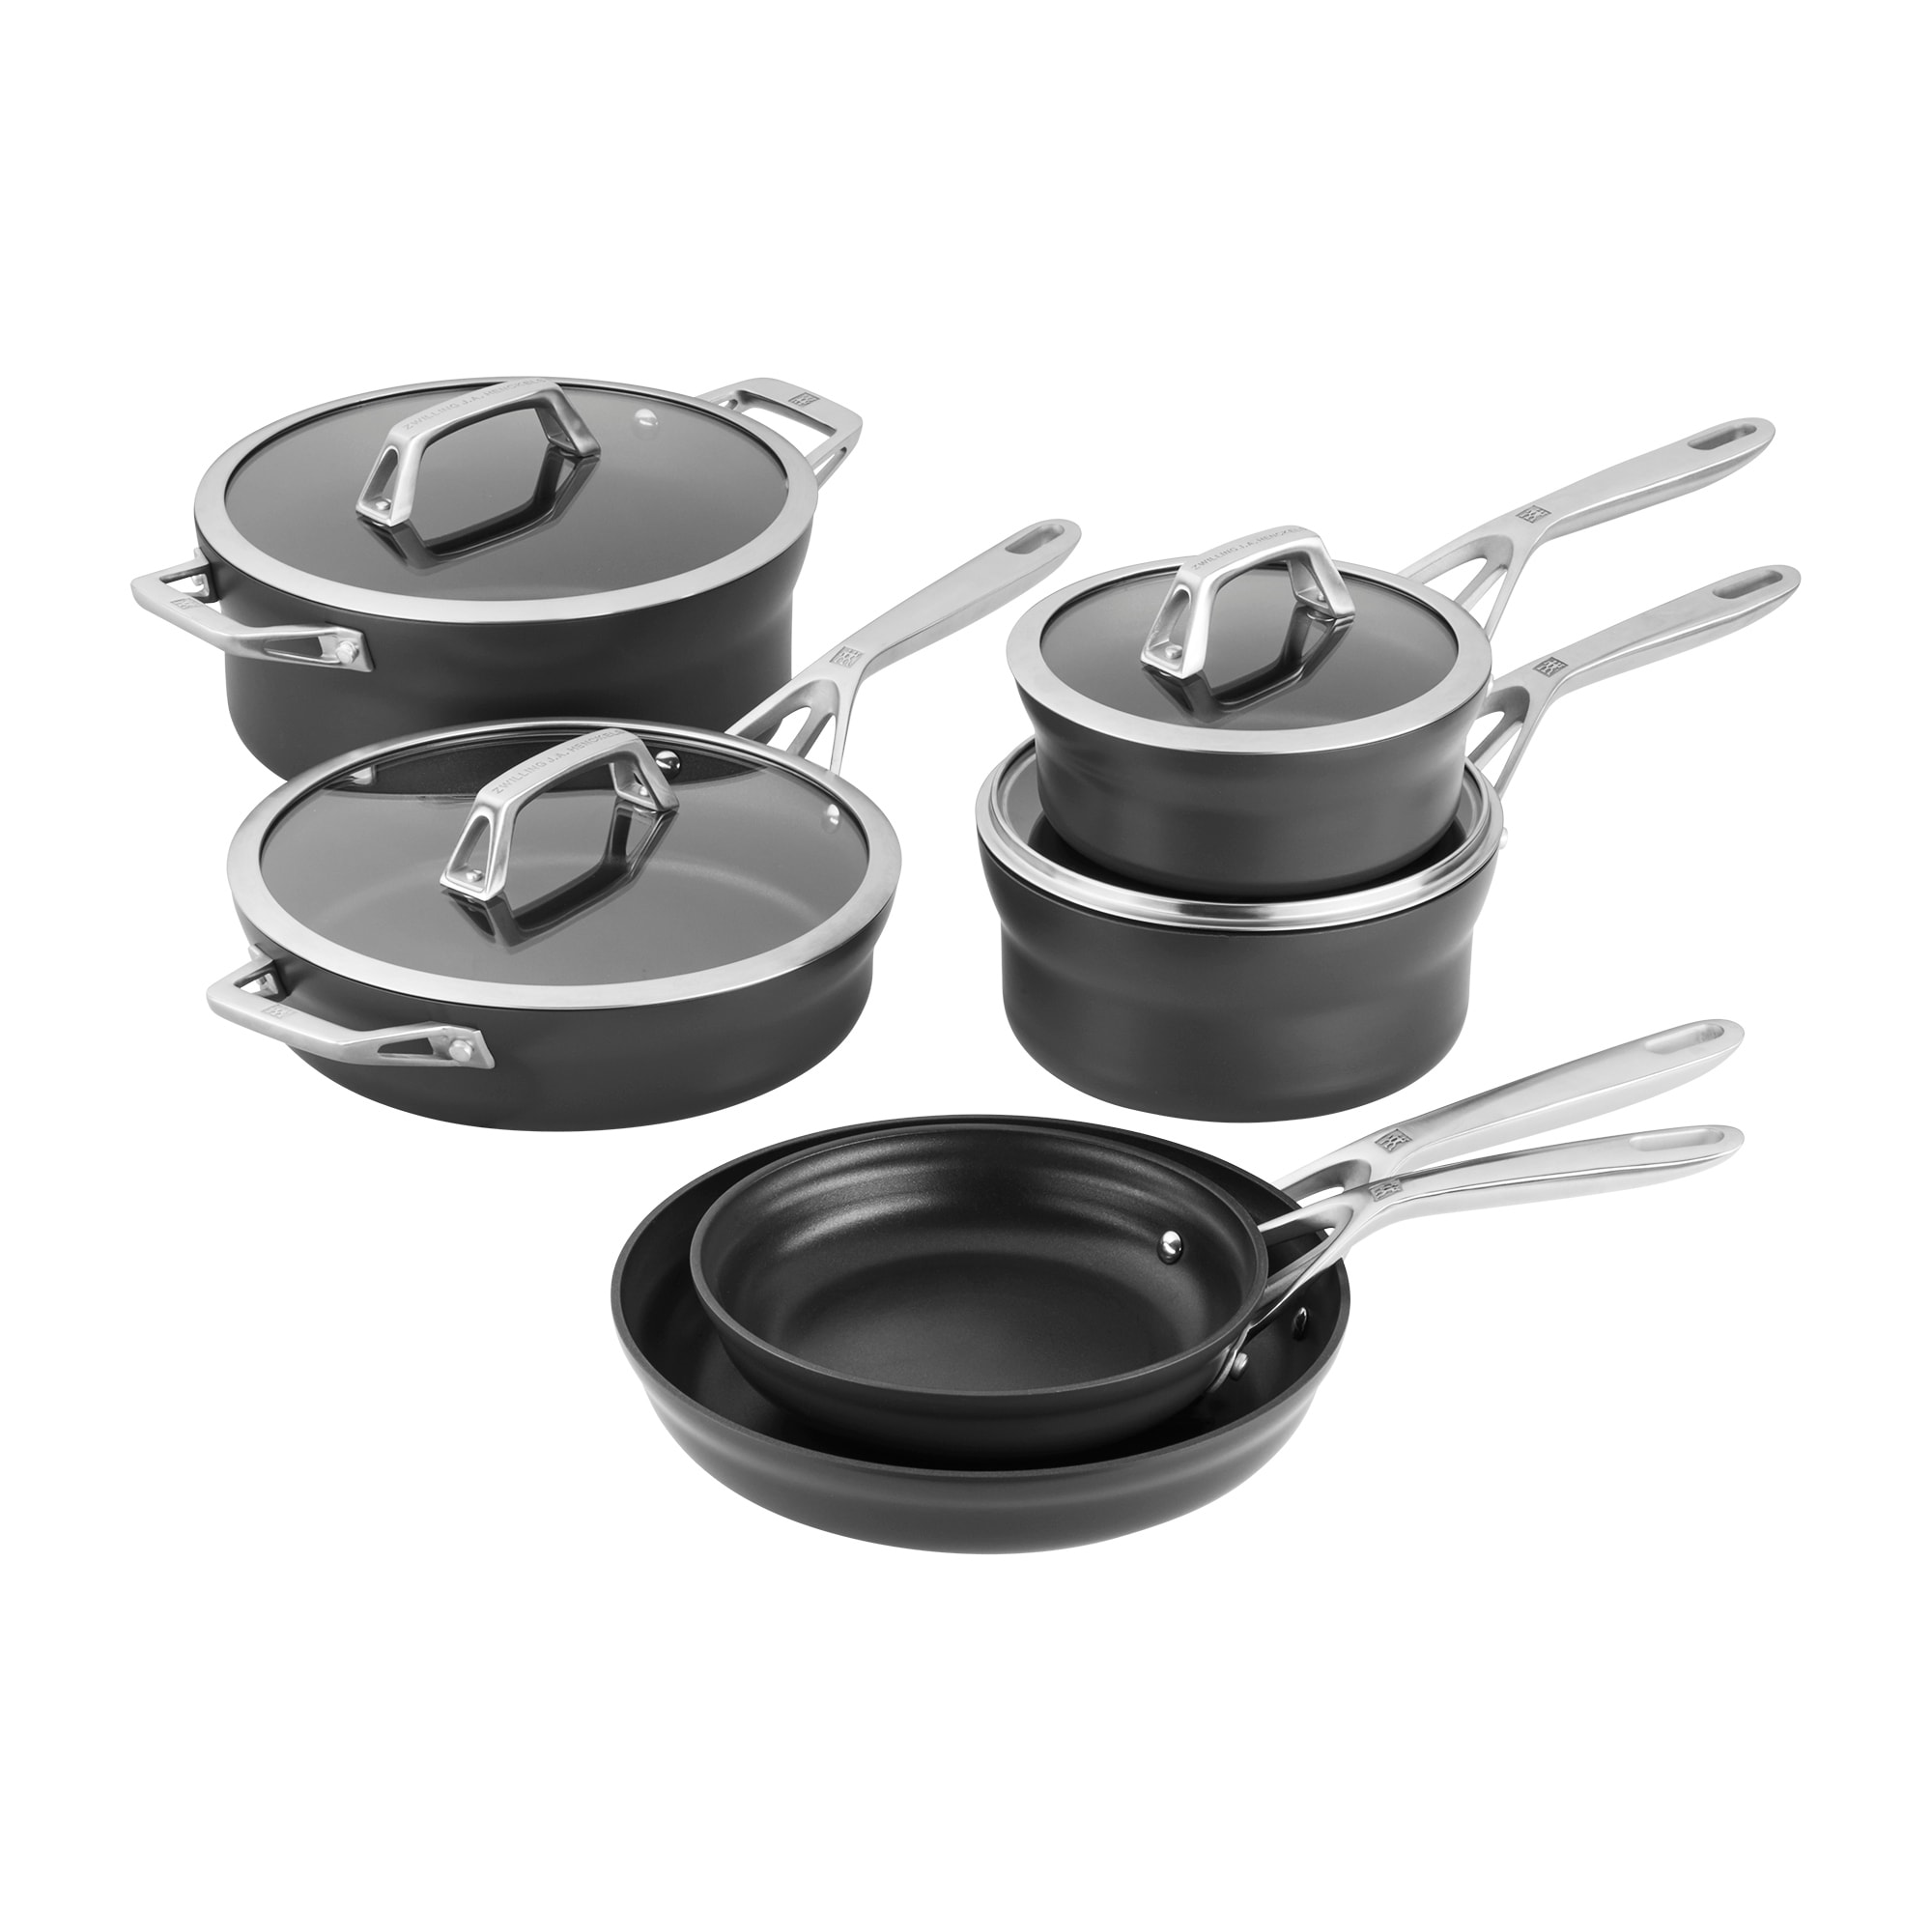 Anolon Accolade Hard Anodized 2-Piece Nonstick Frying Pan Set ,Gray